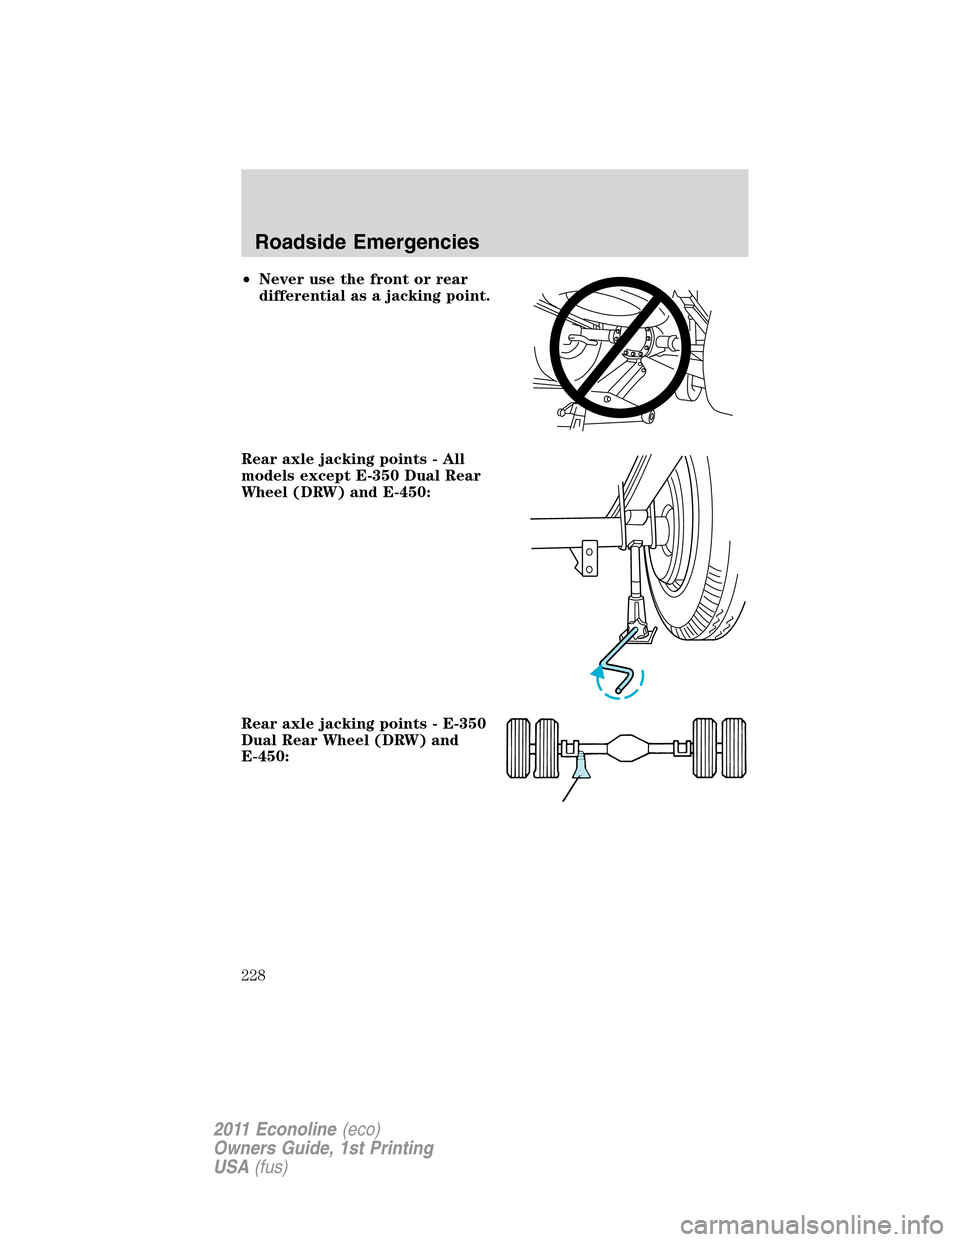 FORD E SERIES 2011 4.G Owners Manual •Never use the front or rear
differential as a jacking point.
Rear axle jacking points - All
models except E-350 Dual Rear
Wheel (DRW) and E-450:
Rear axle jacking points - E-350
Dual Rear Wheel (DR